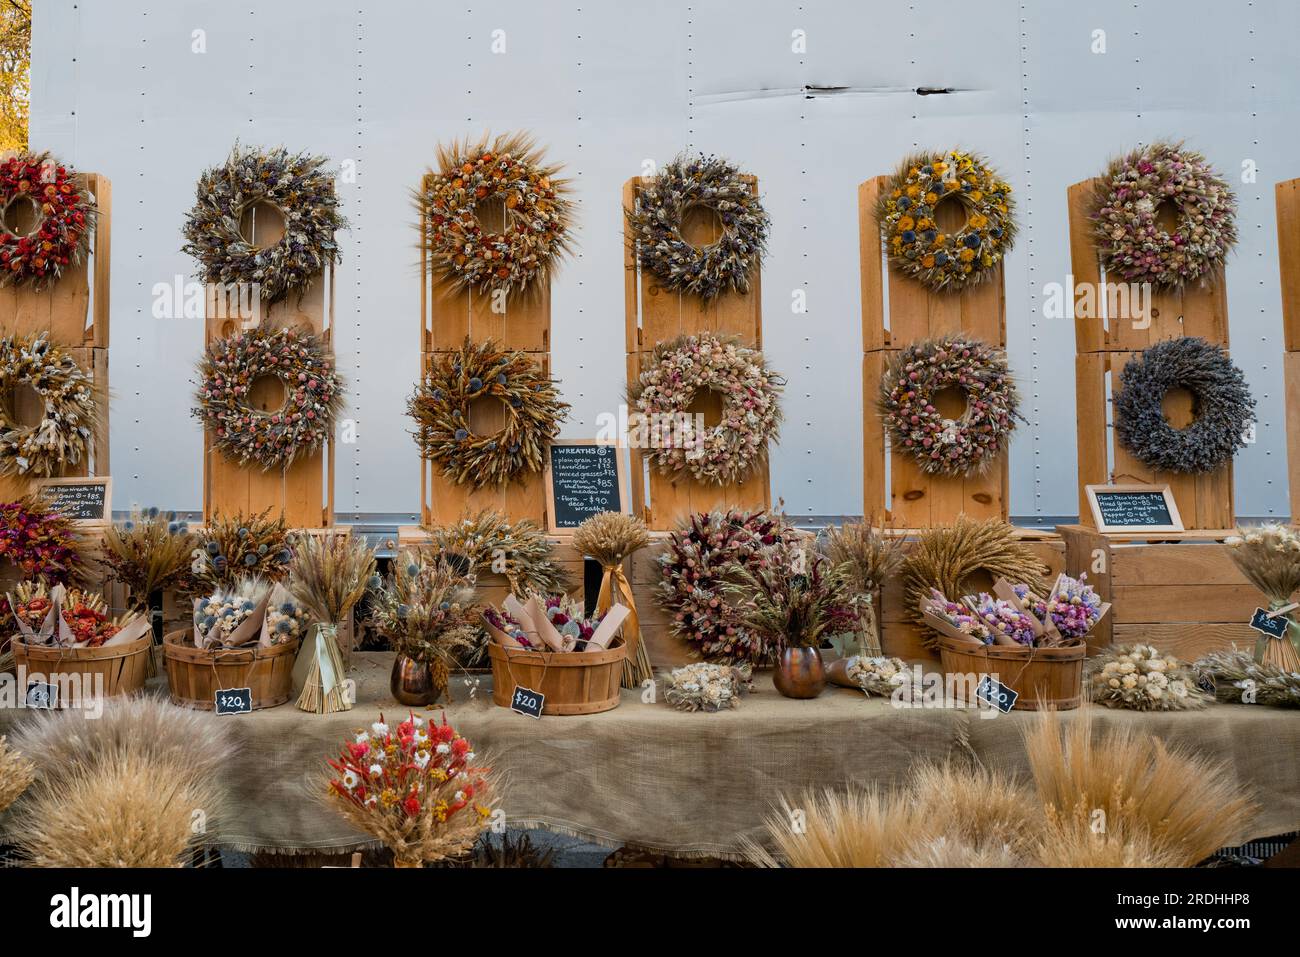 November 23, 2022 - New York, USA: Handmade wreaths and dry flowers on sale at Grow NYC Union Square Greenmarket, a year-round farmers market with var Stock Photo